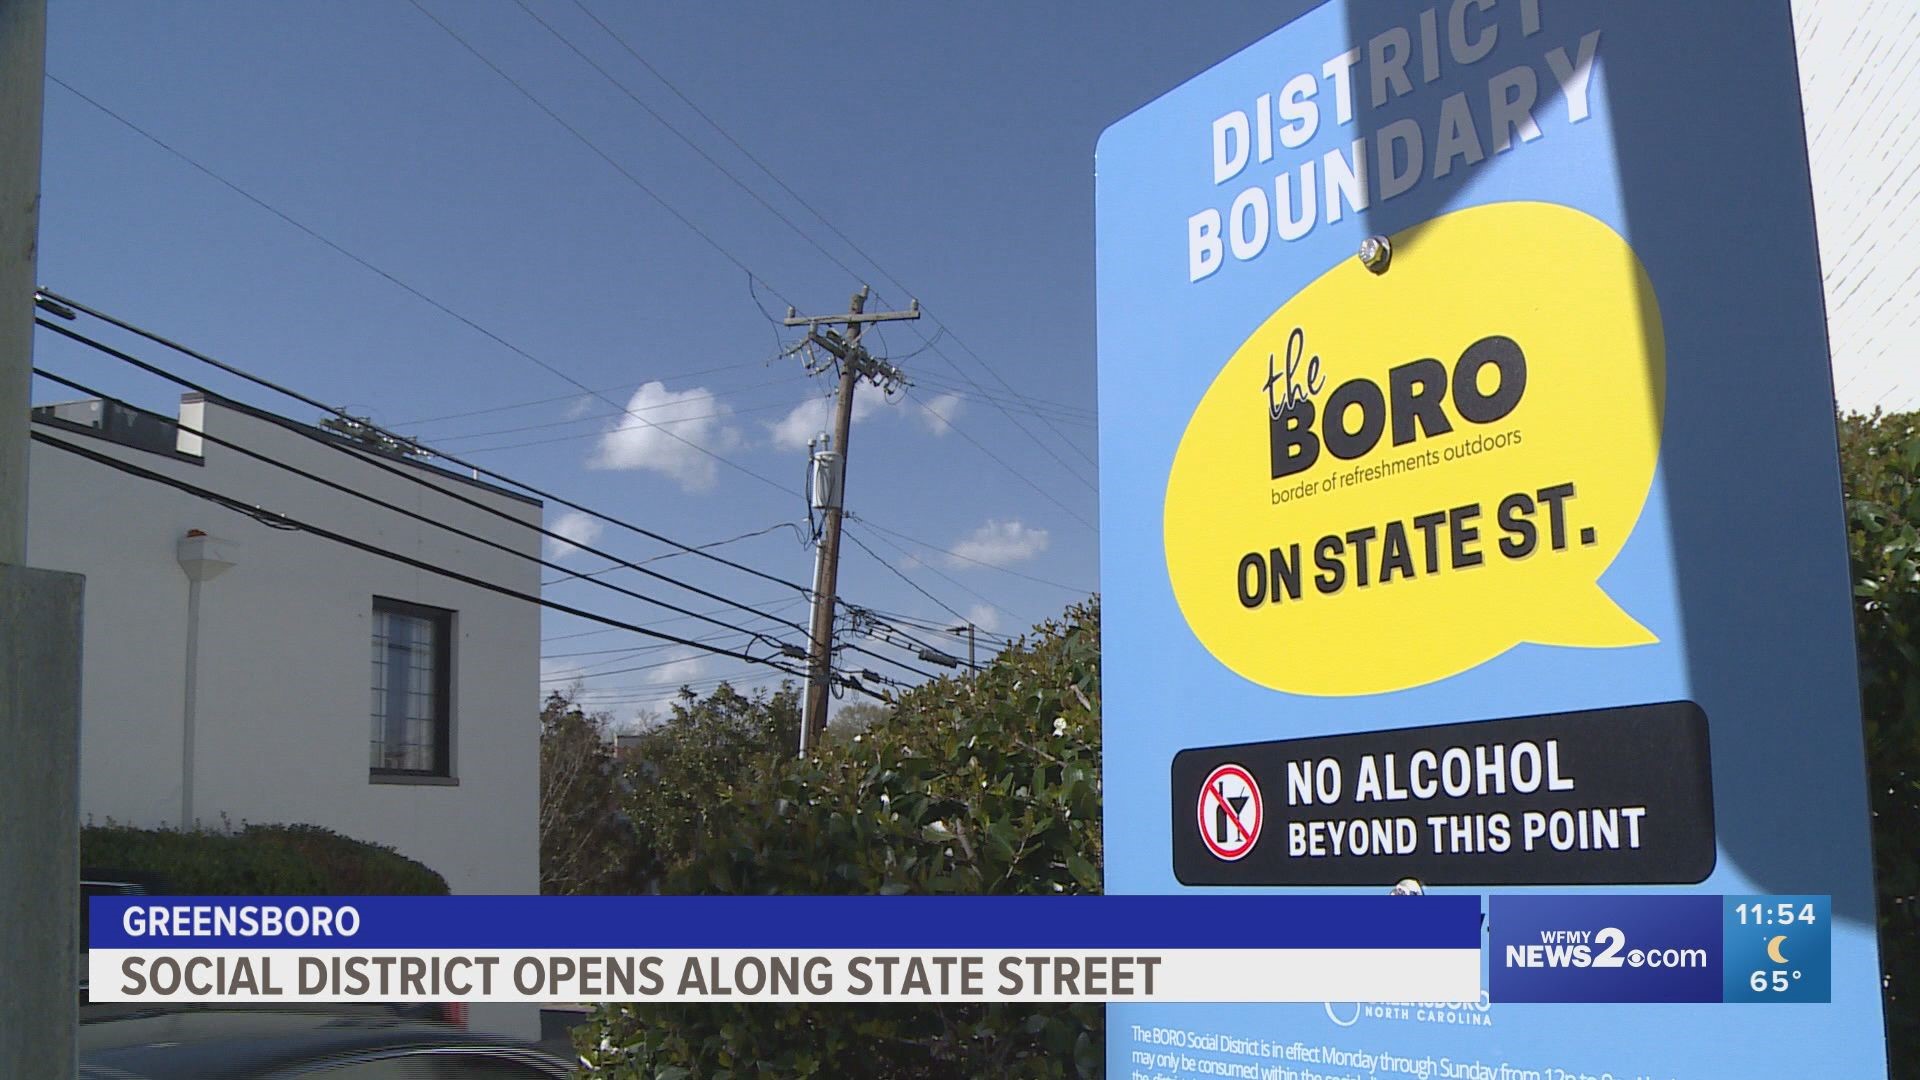 People can now take drinks from participating businesses along State Street in Greensboro.